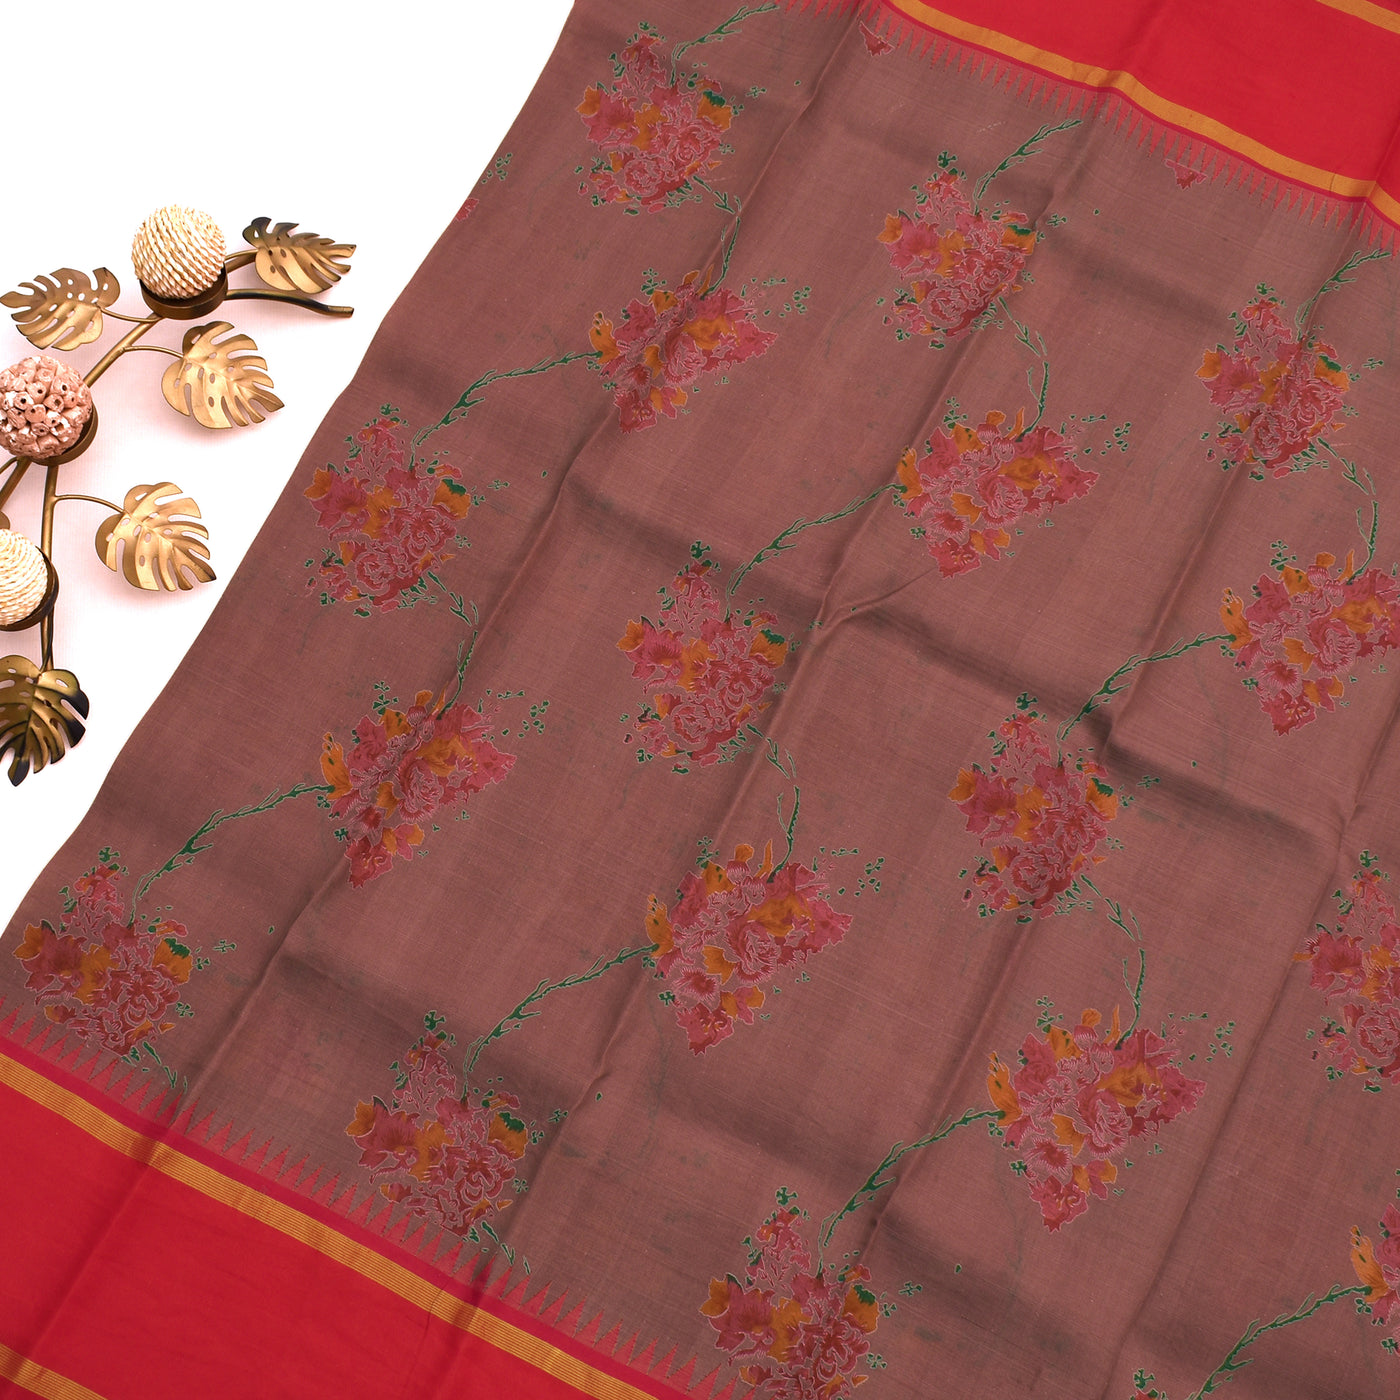 Onion Pink Printed Kanchi Silk Saree with Floral Printed Design